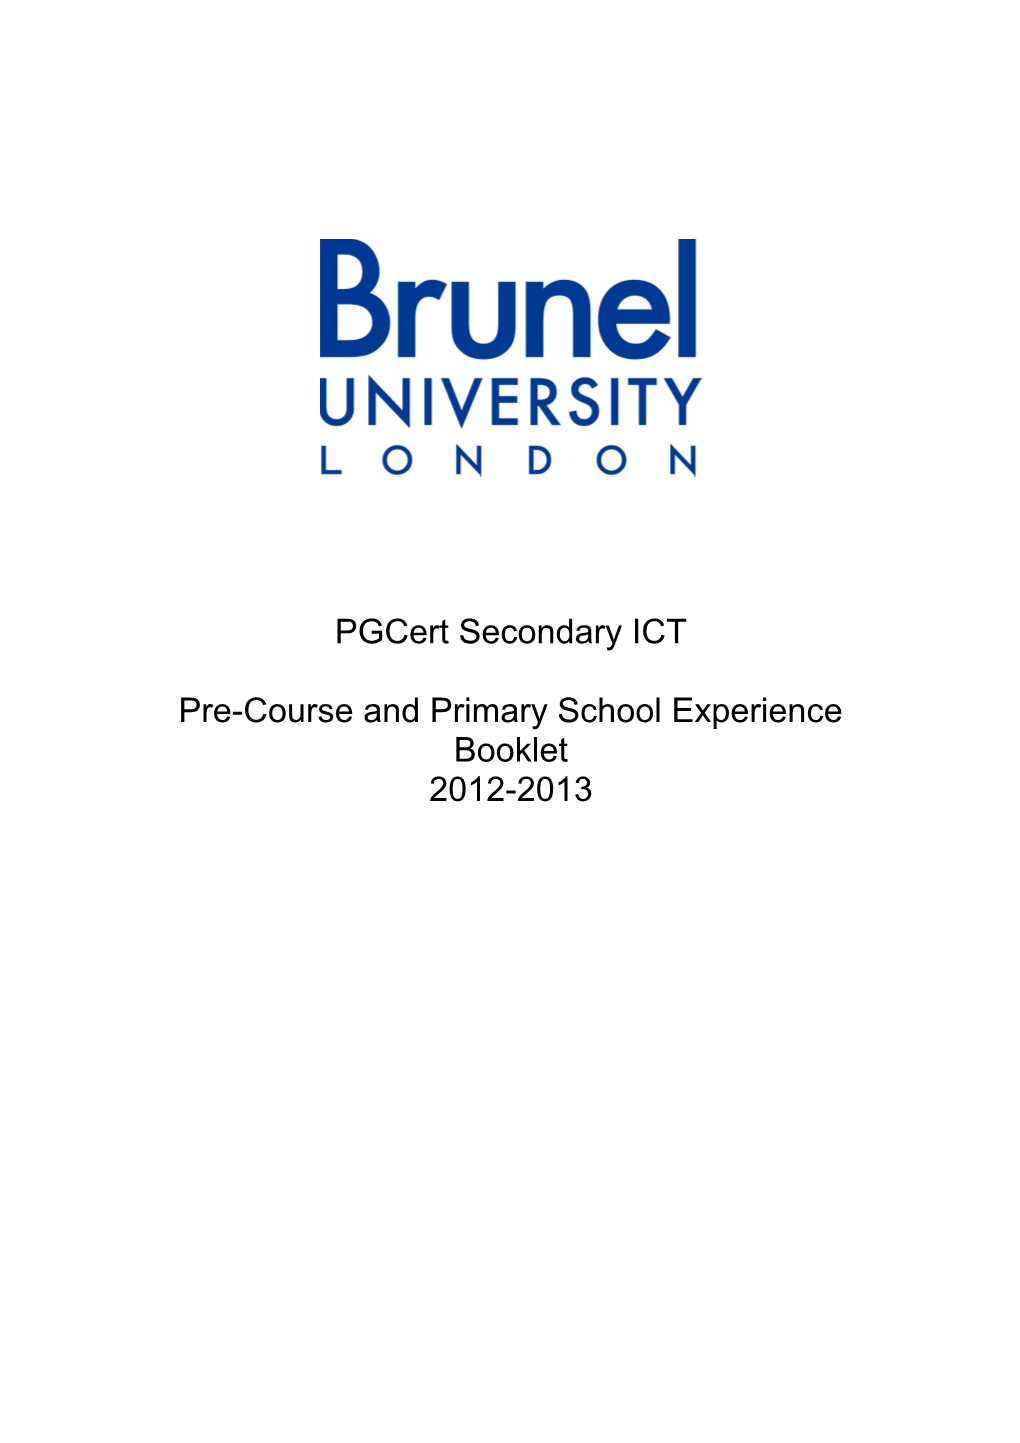 Pre-Course and Primary School Experience Booklet